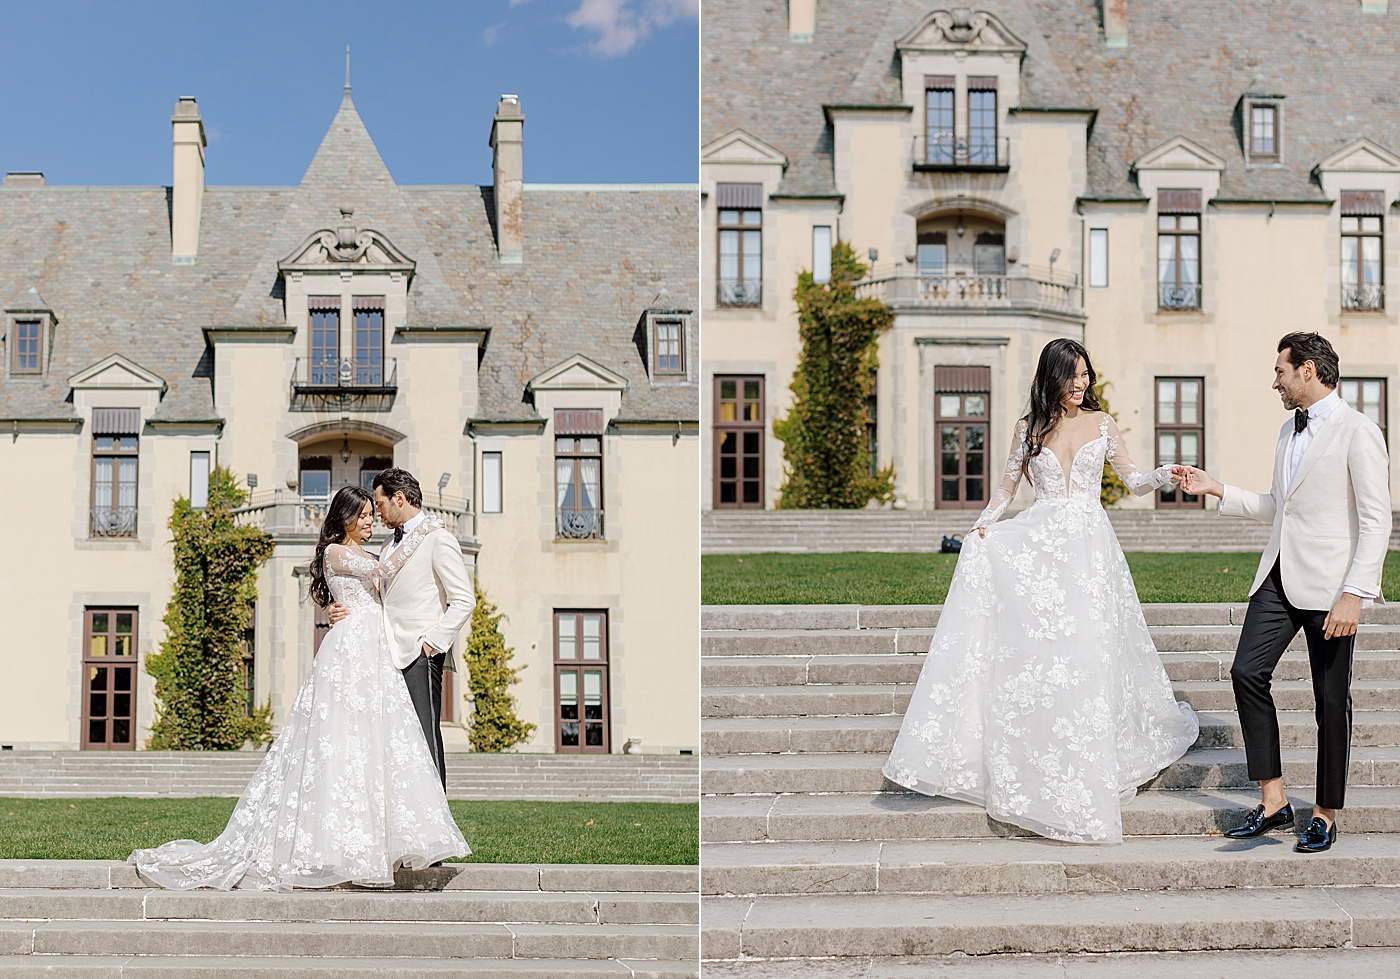 Side by side images of a bride and groom together in front of the entrance of a castle in bright sun | Image by Hope Helmuth Photography